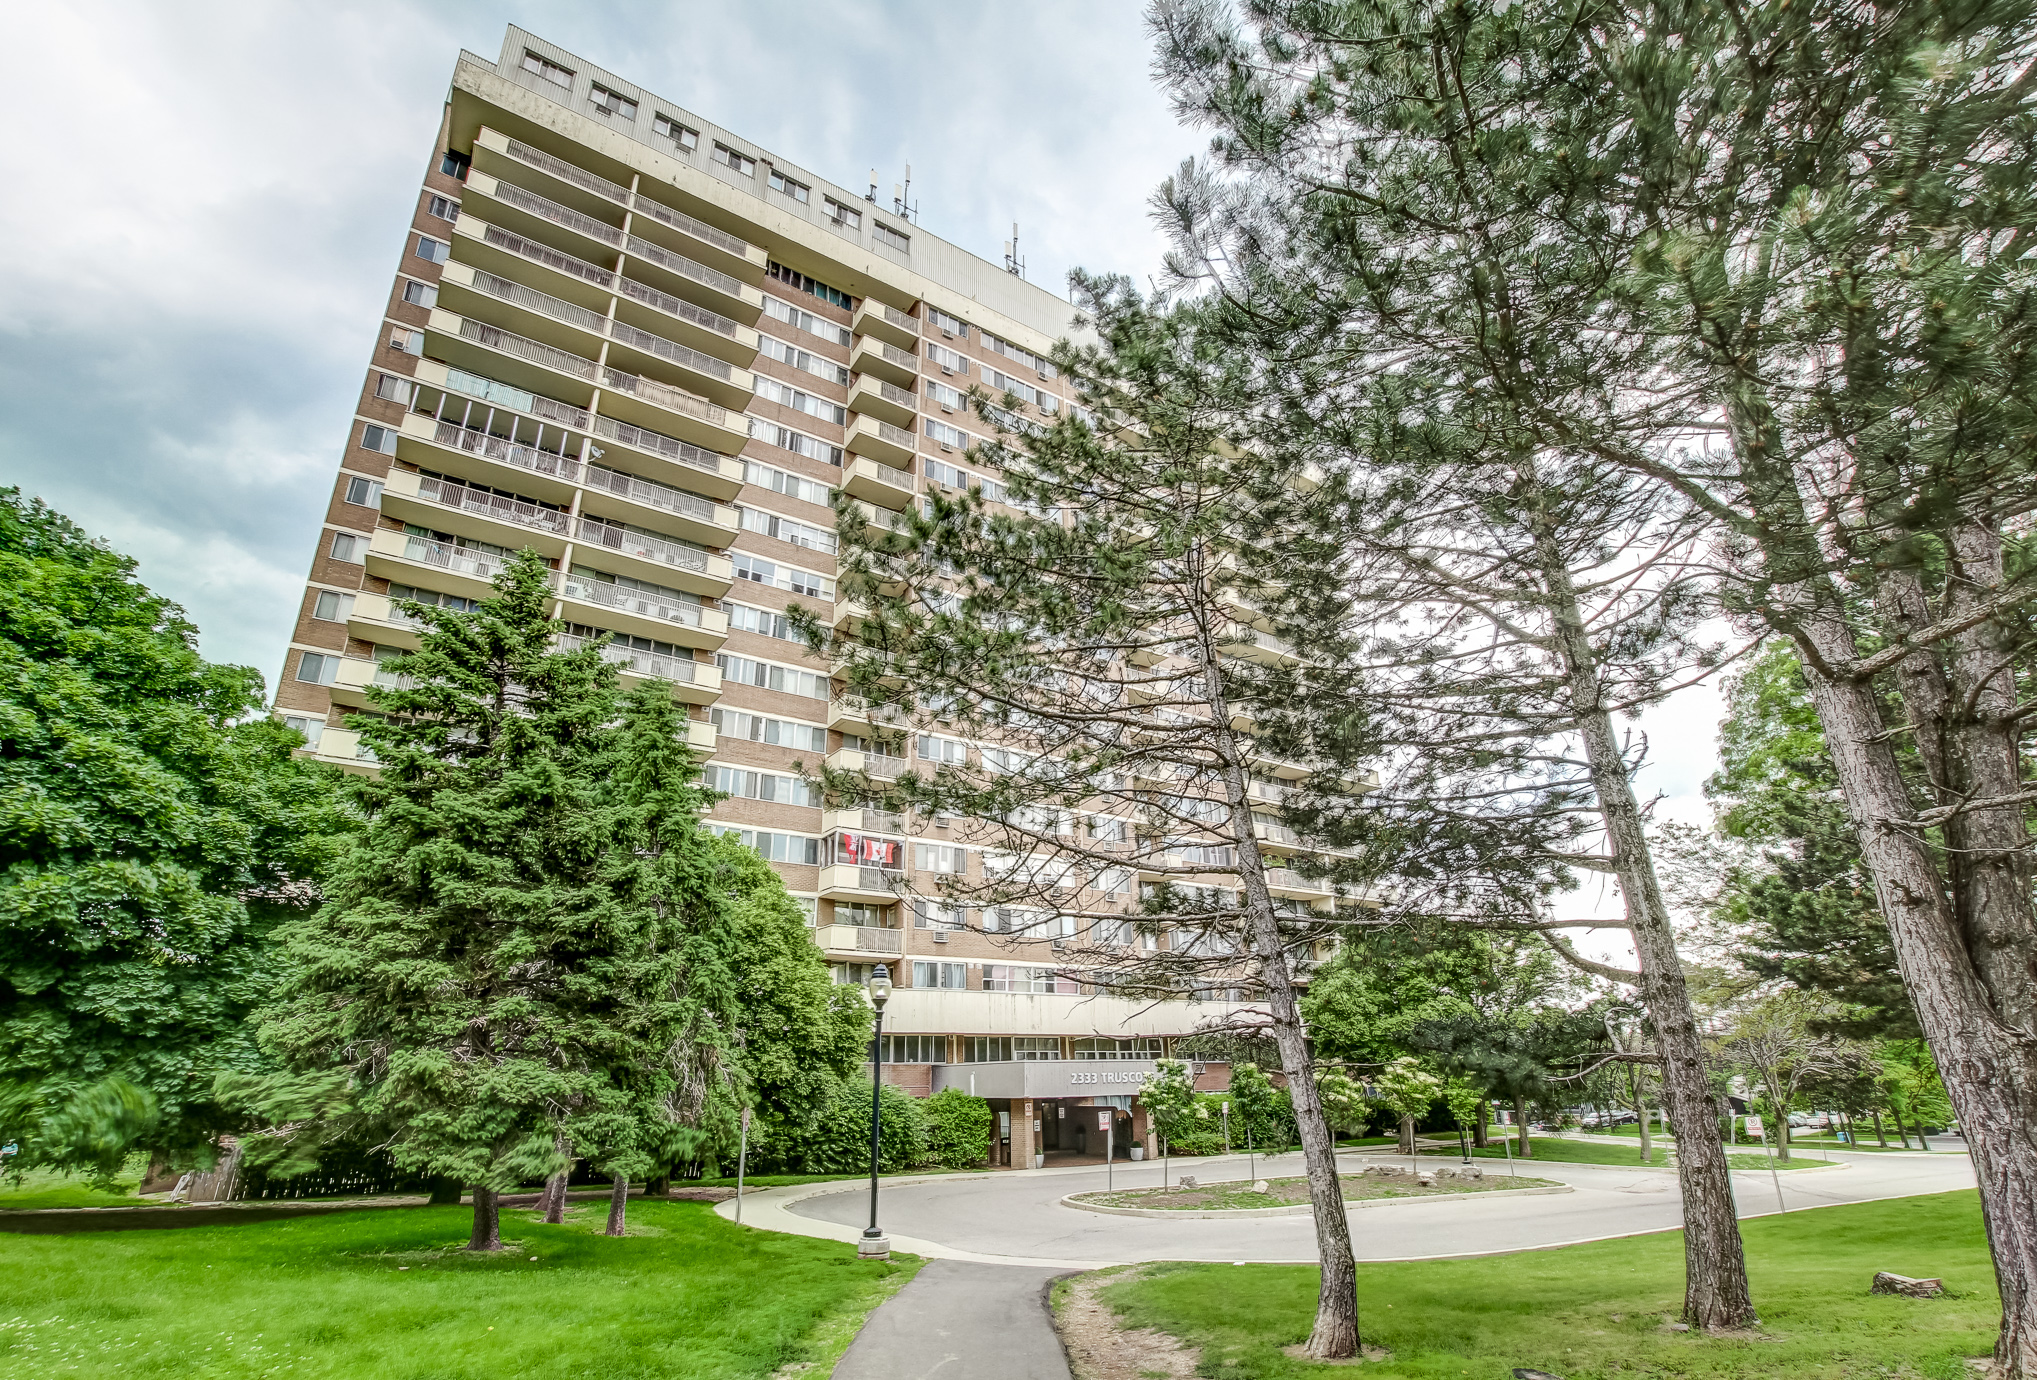 1 bedroom Apartments for rent in Mississauga at Park Royal Village - Photo 10 - RentersPages – L414764